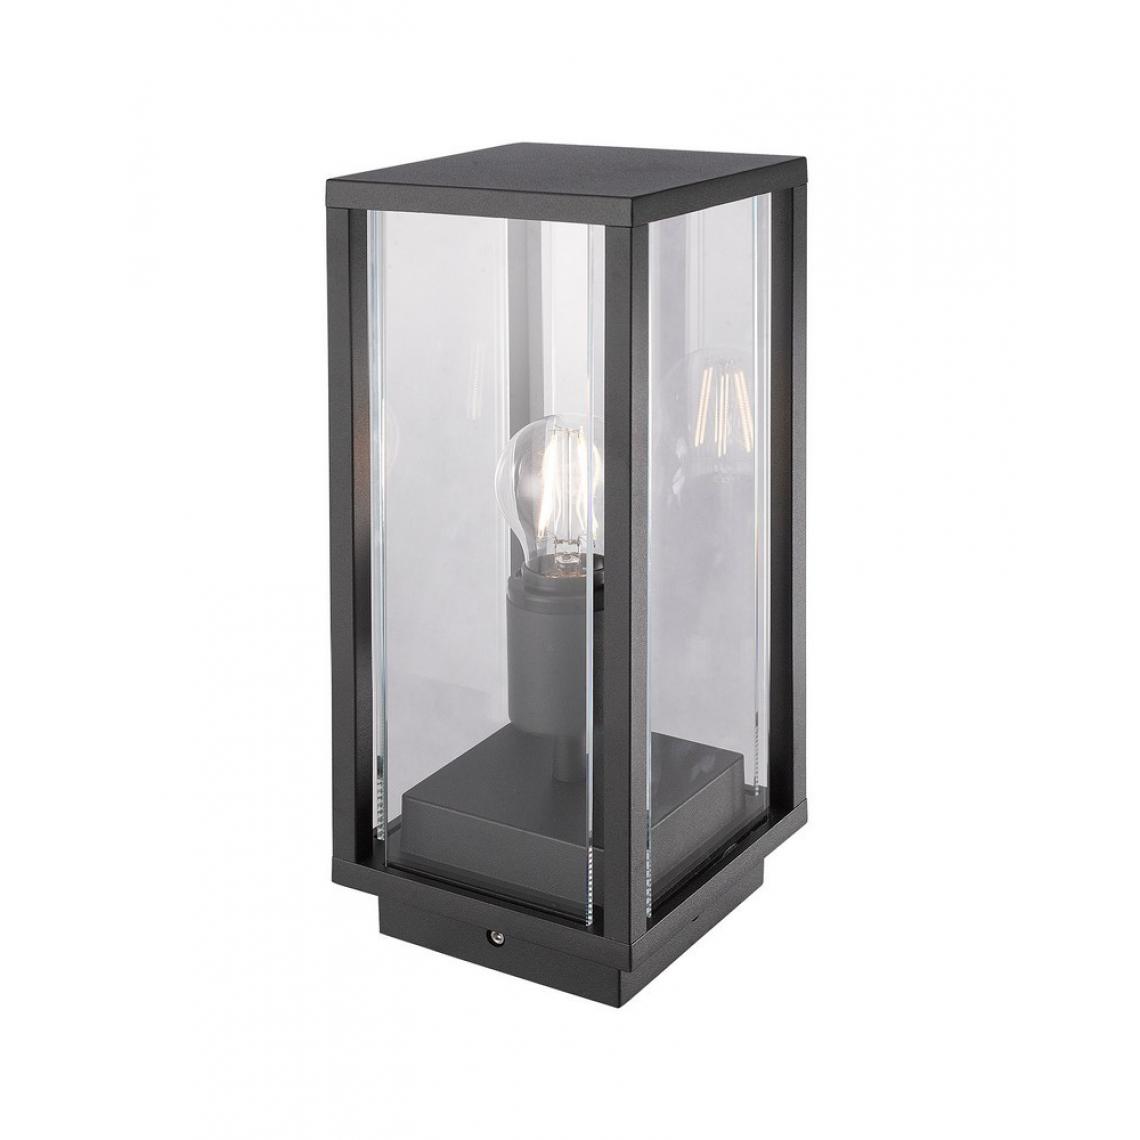 Inspired - Lampe sur pied, 1 x E27, IP54, - Lampadaire